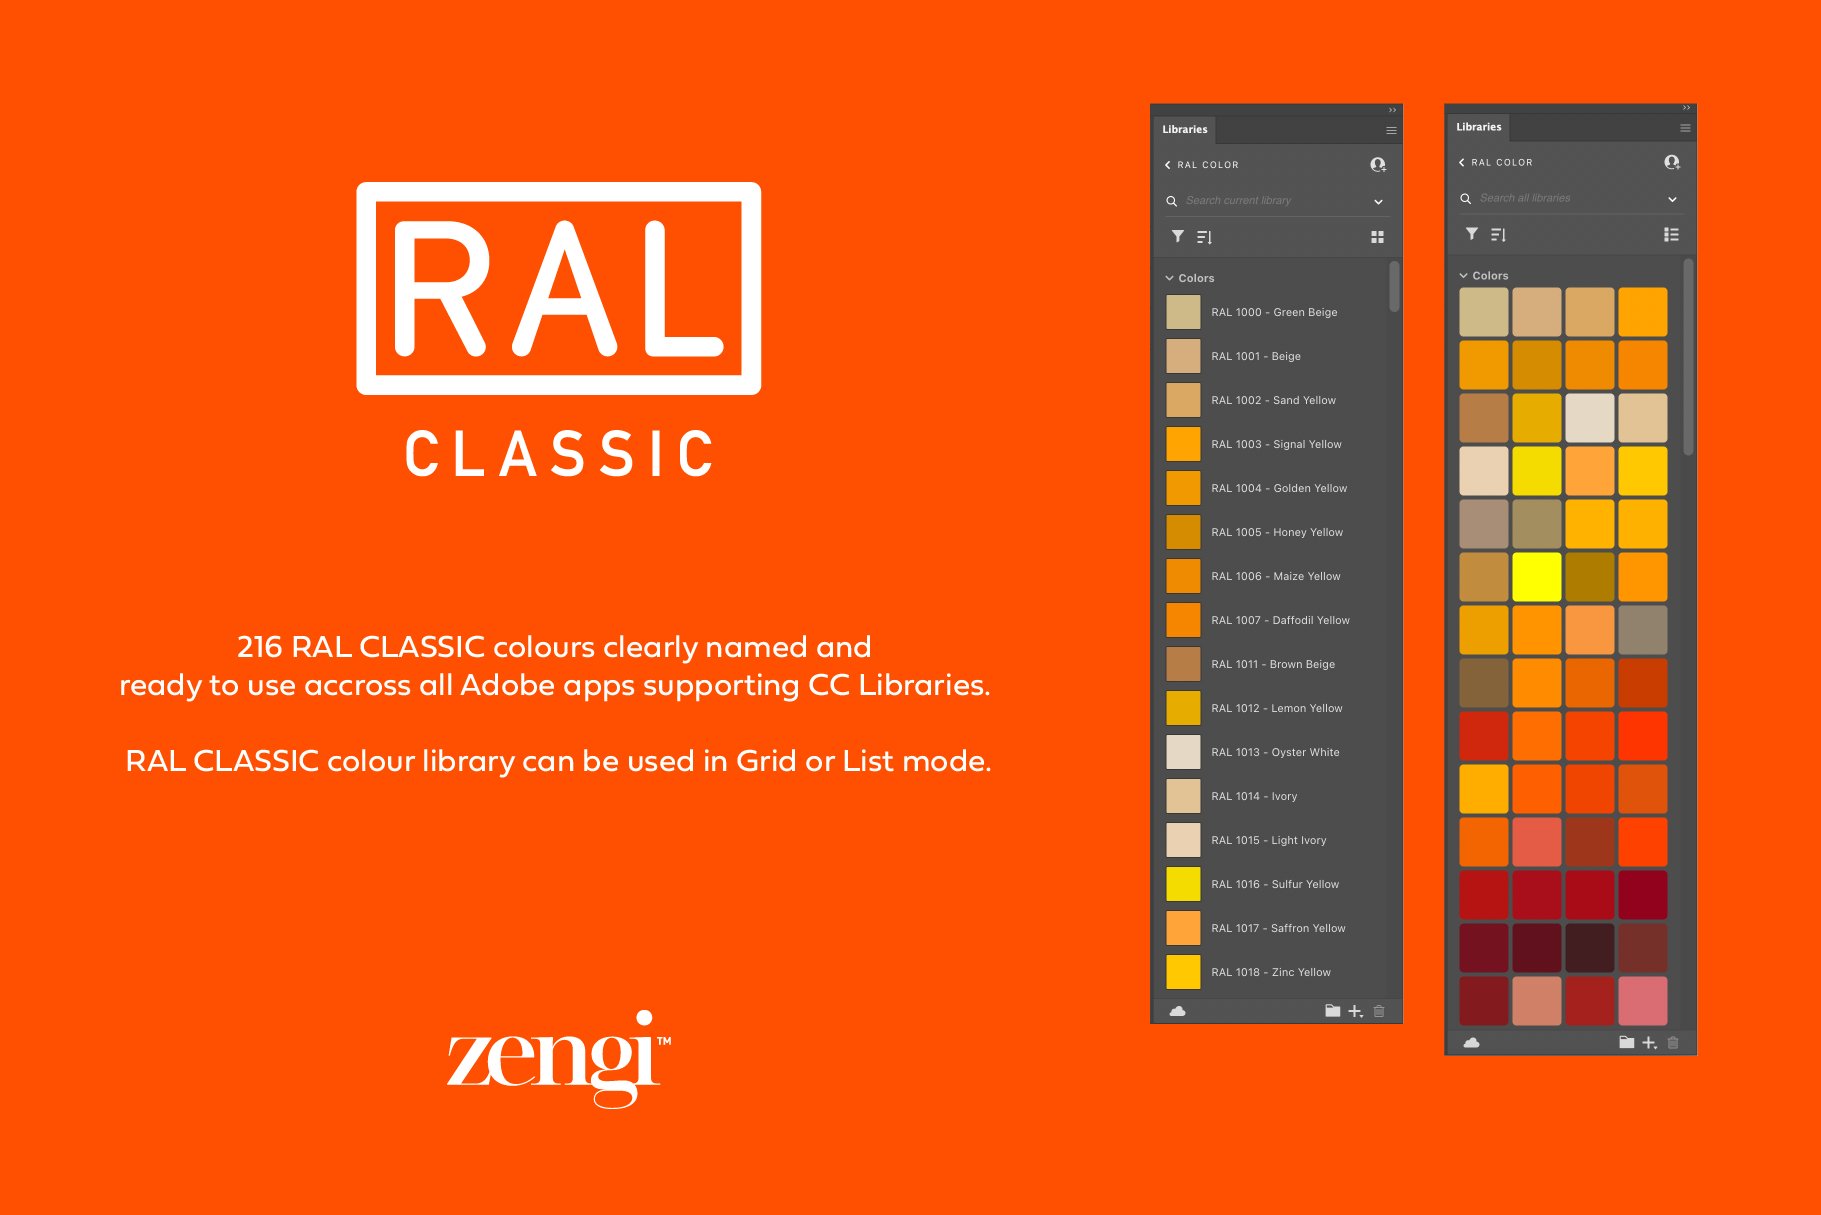 RAL CLASSIC Color Librarypreview image.